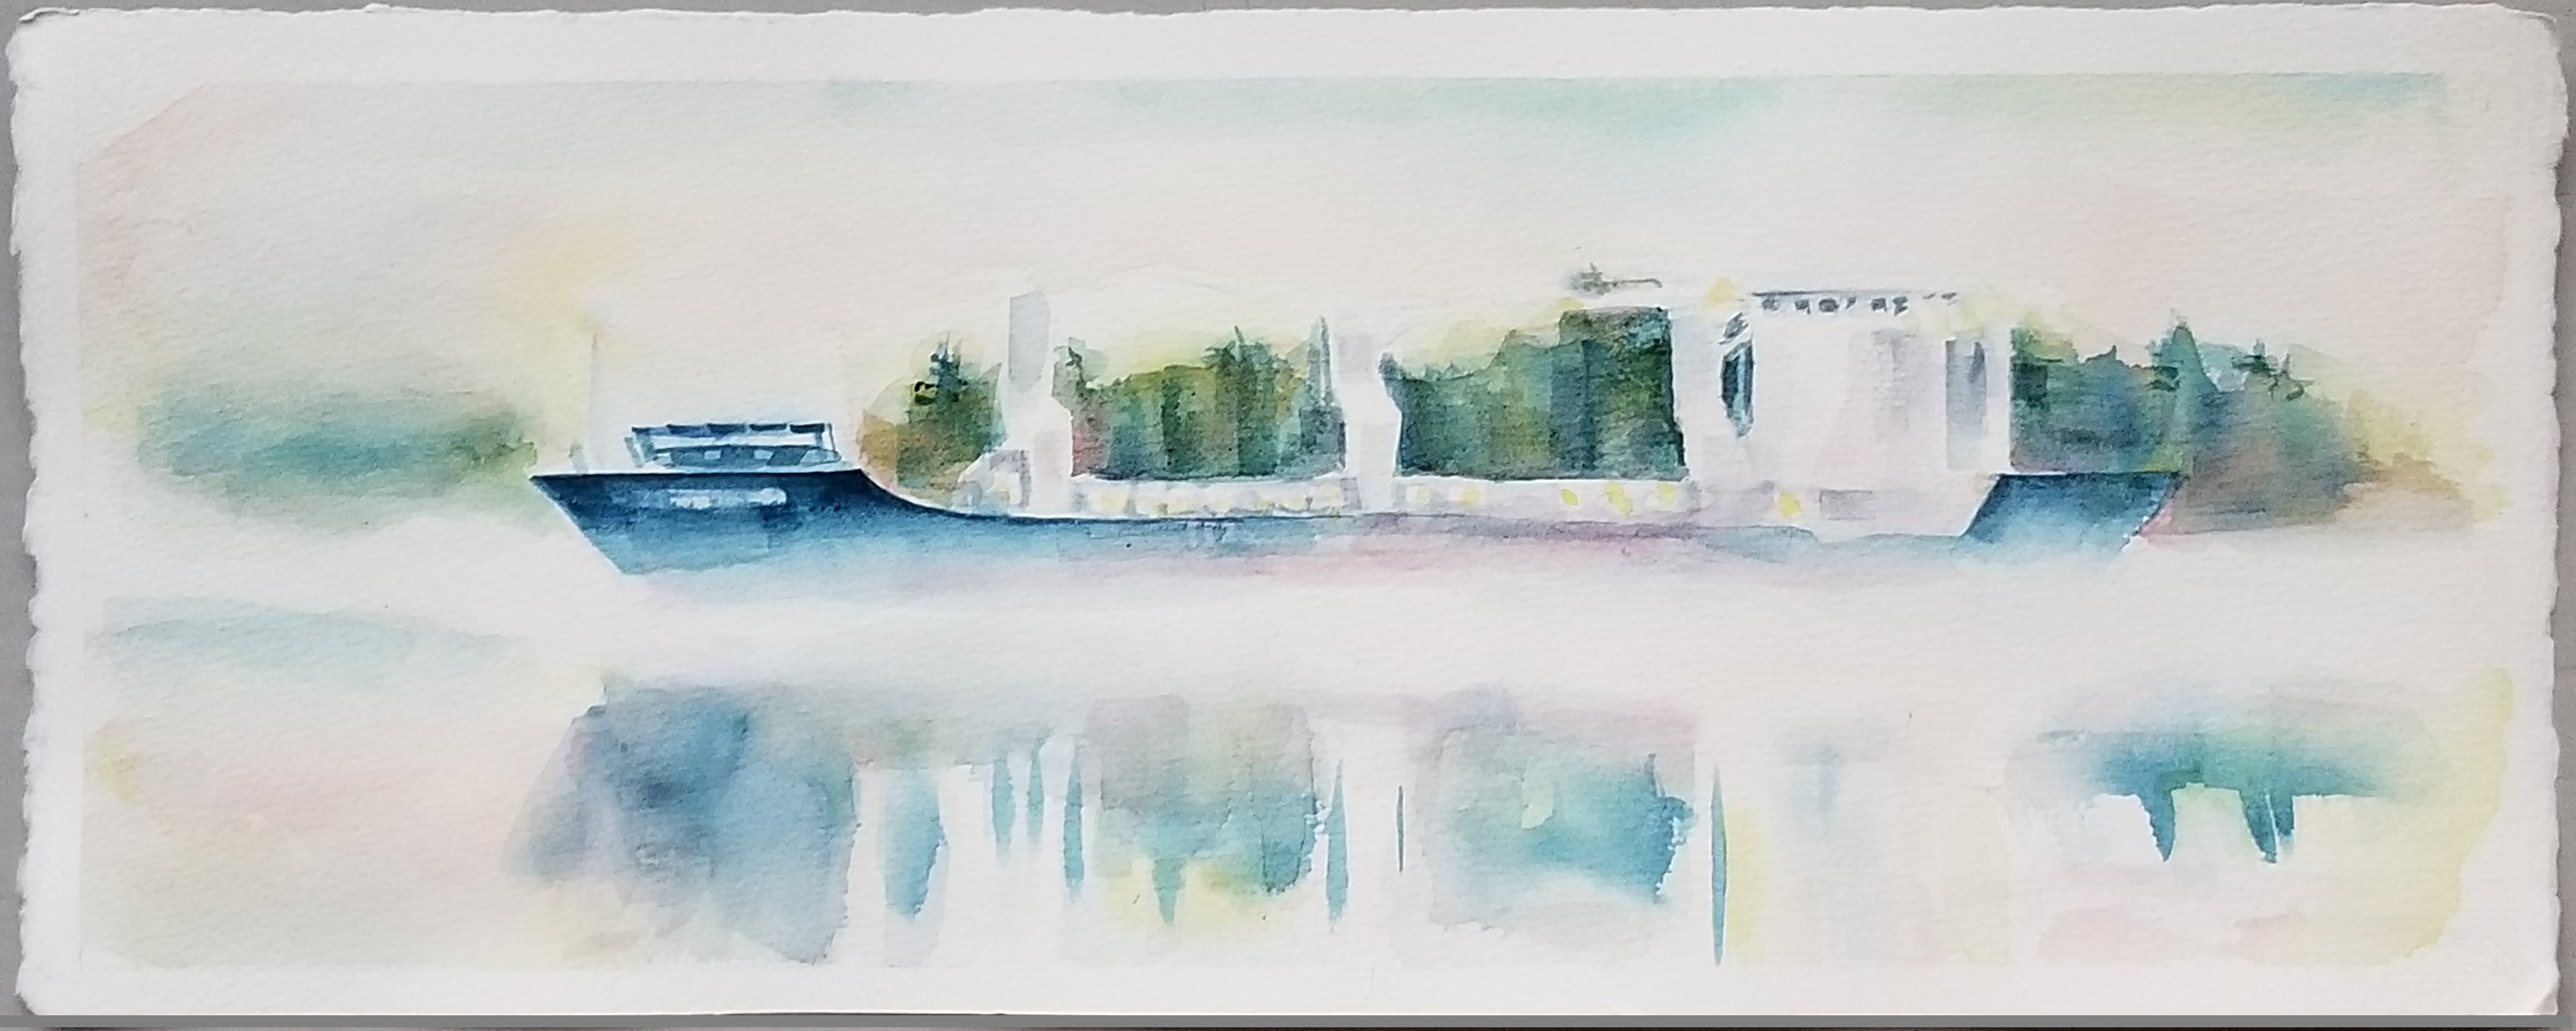 Merrilyne Hendrickson; Freighter In The Fog On T..., 2020, Original Watercolor, 27 x 13 inches. Artwork description: 241 Quiet and mystical gliding through the fog...